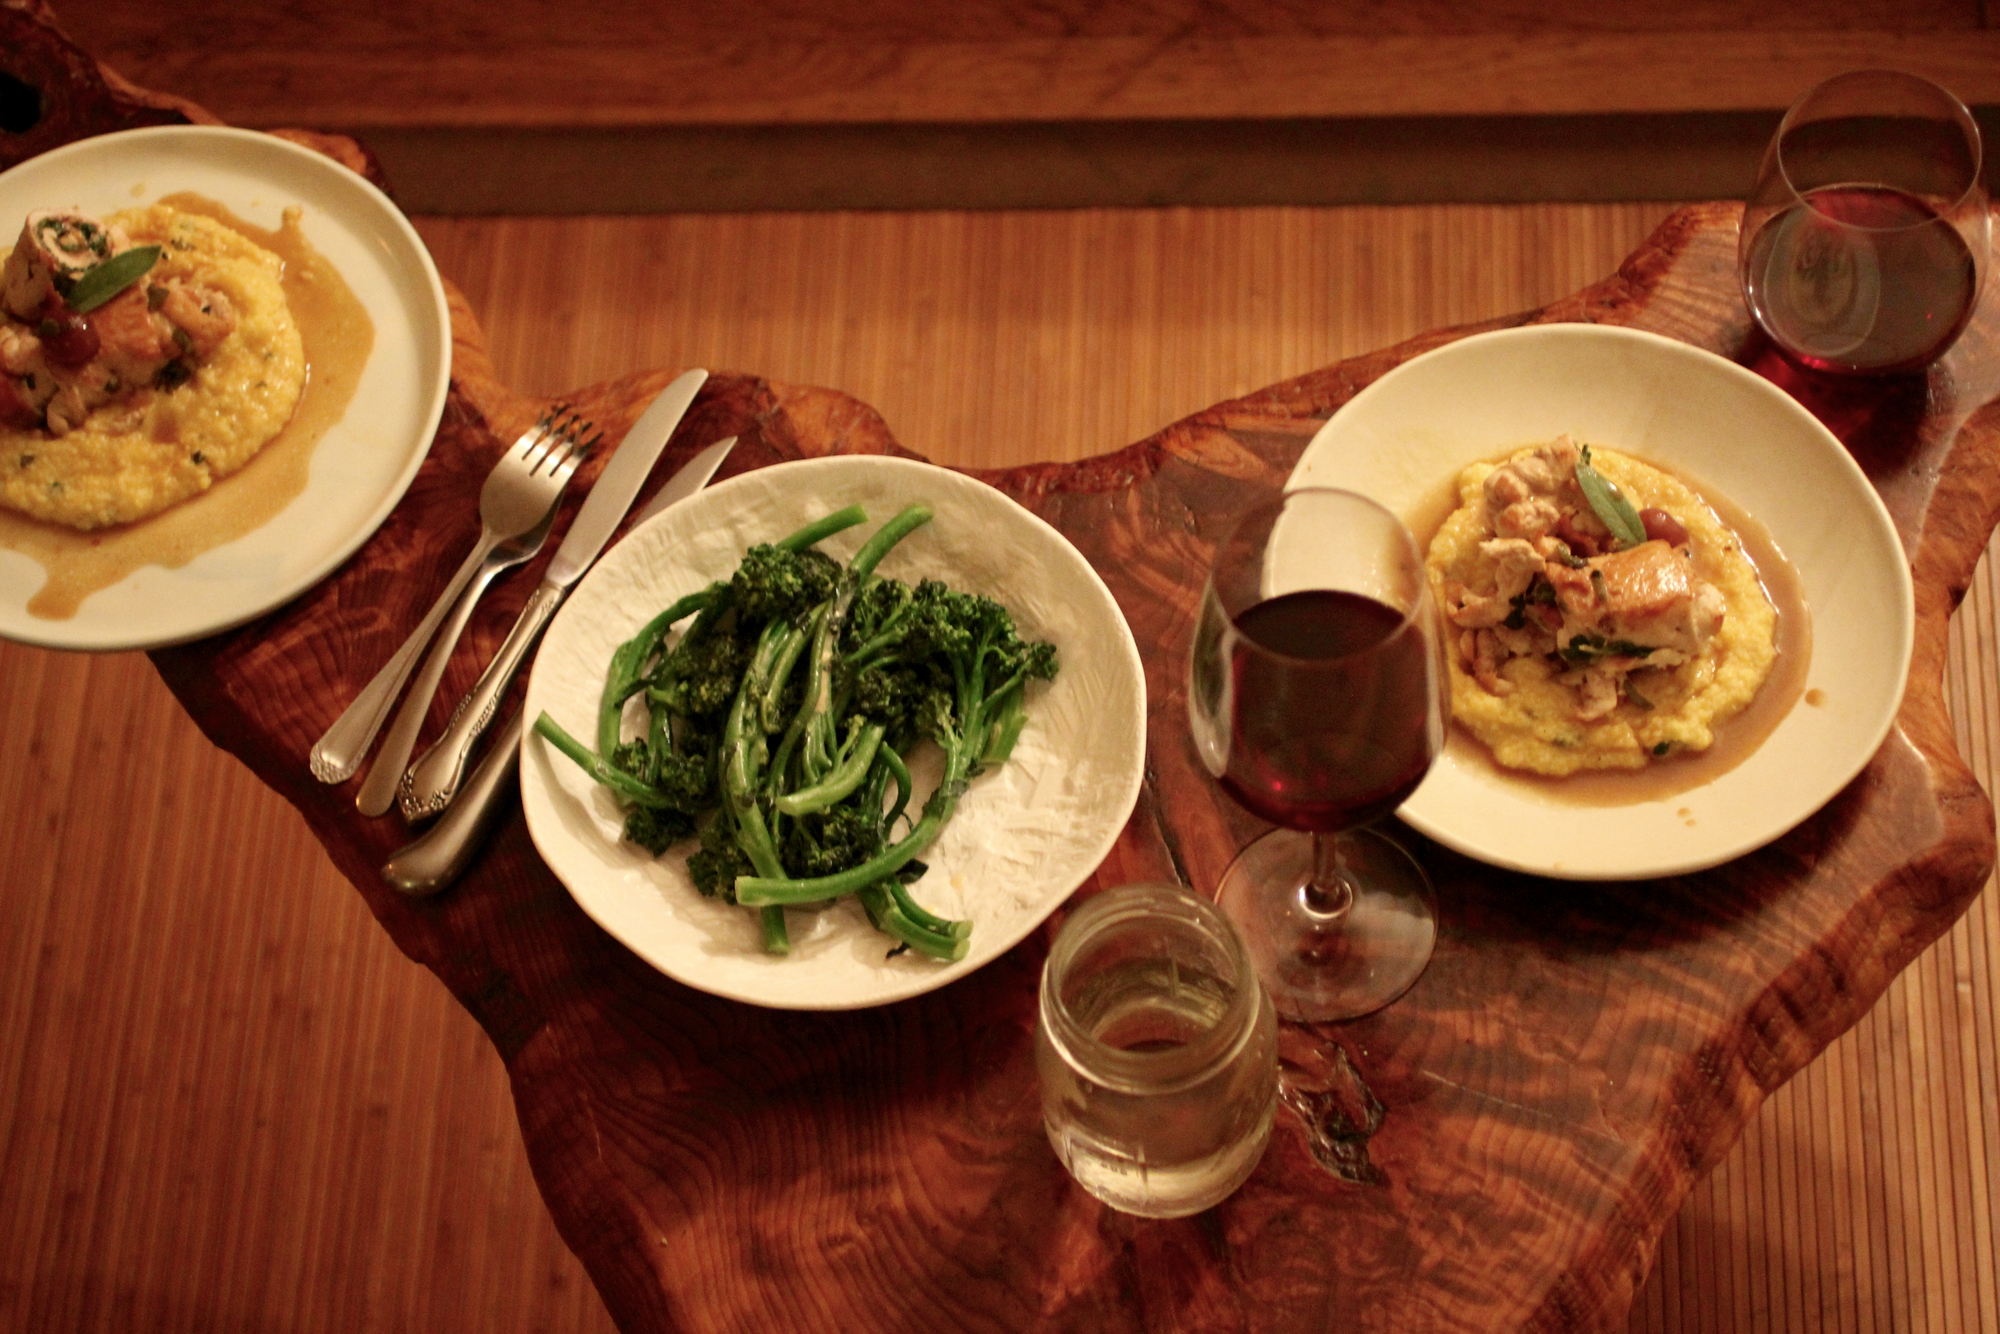 A meal of chicken brandied cherry saltimbocca, broccolini, and of course, wine.